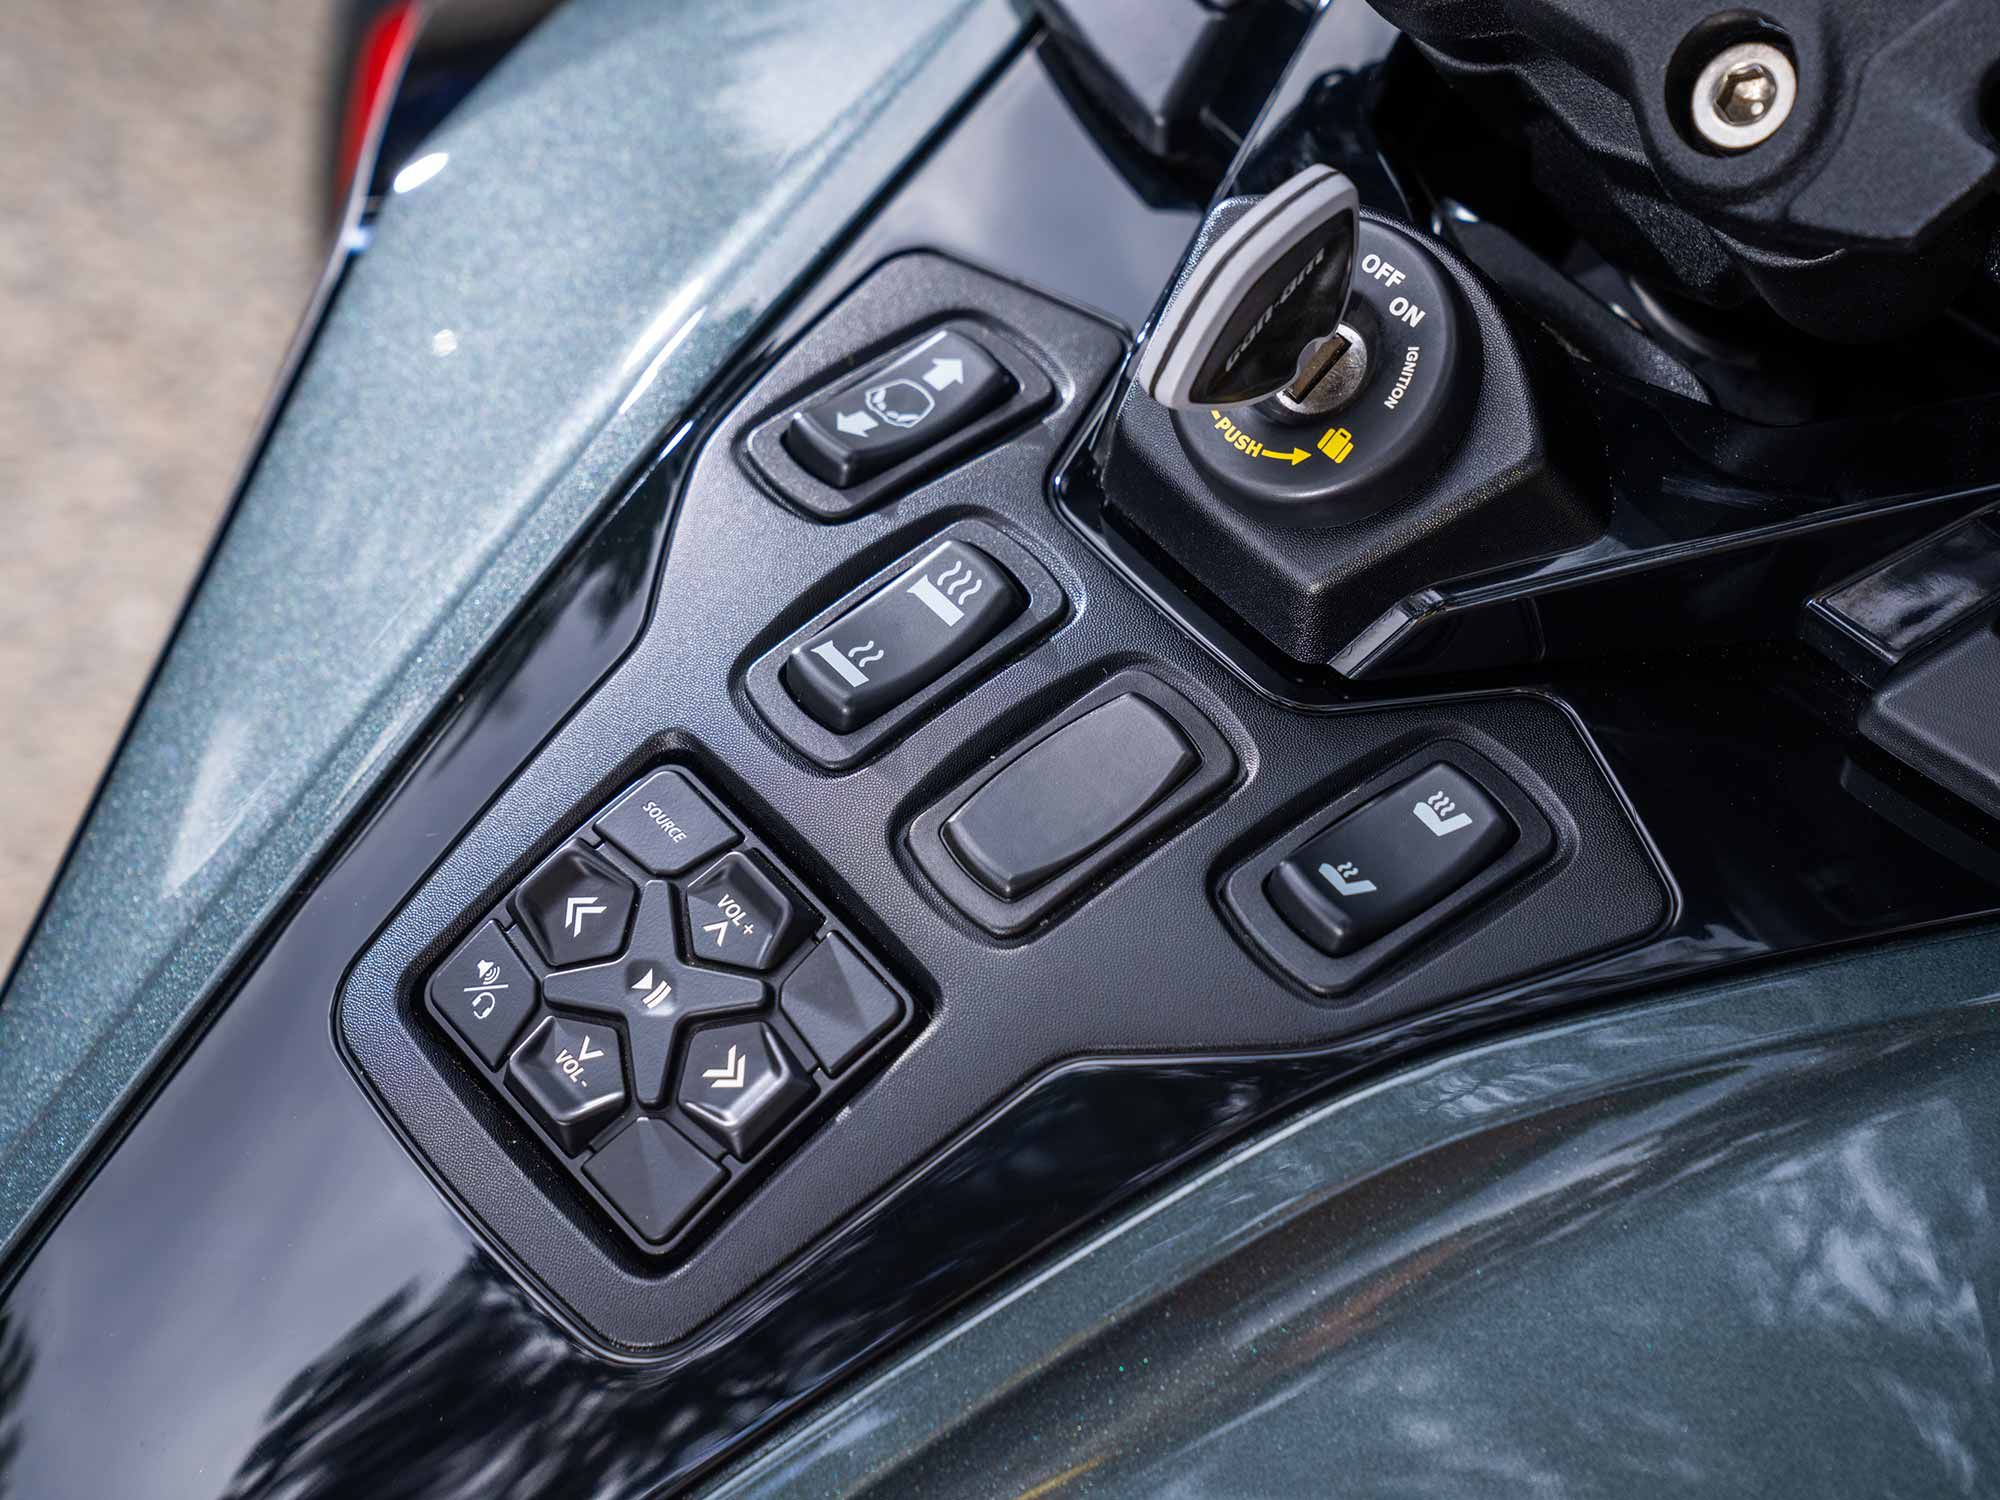 We’re big fans of the Can-Am’s traditional mechanical ignition key and its stereo control placement that make it easy to use while riding.